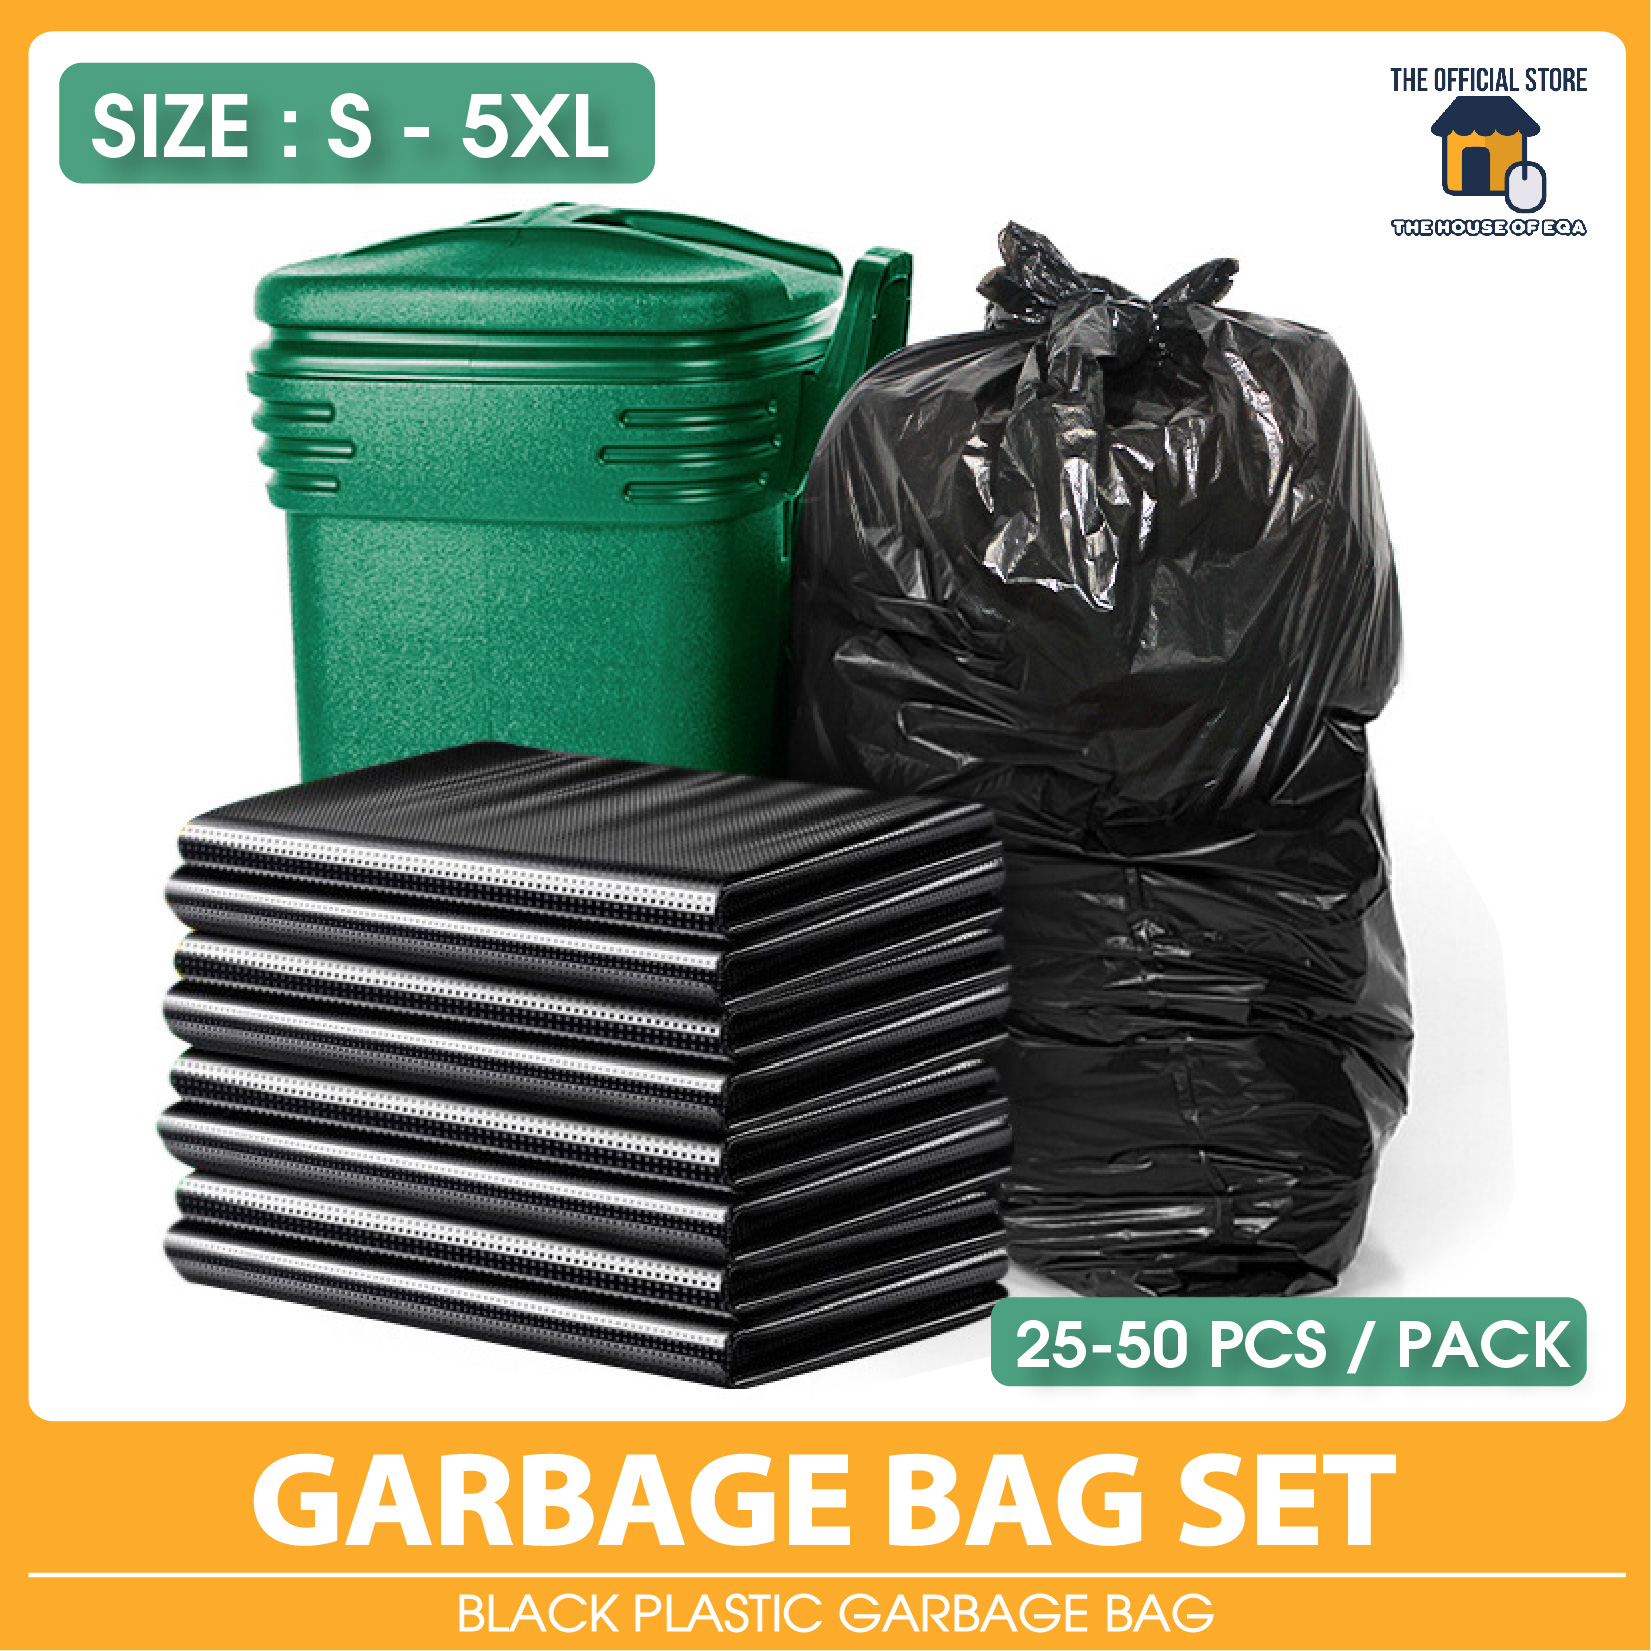 2 Rolls (100pcs) 4 Gallon Garbage Bags [extra Thick][leak-proof], Black  Small But Durable Trash Bags For Home Bathroom Bedroom Office Trash Cans